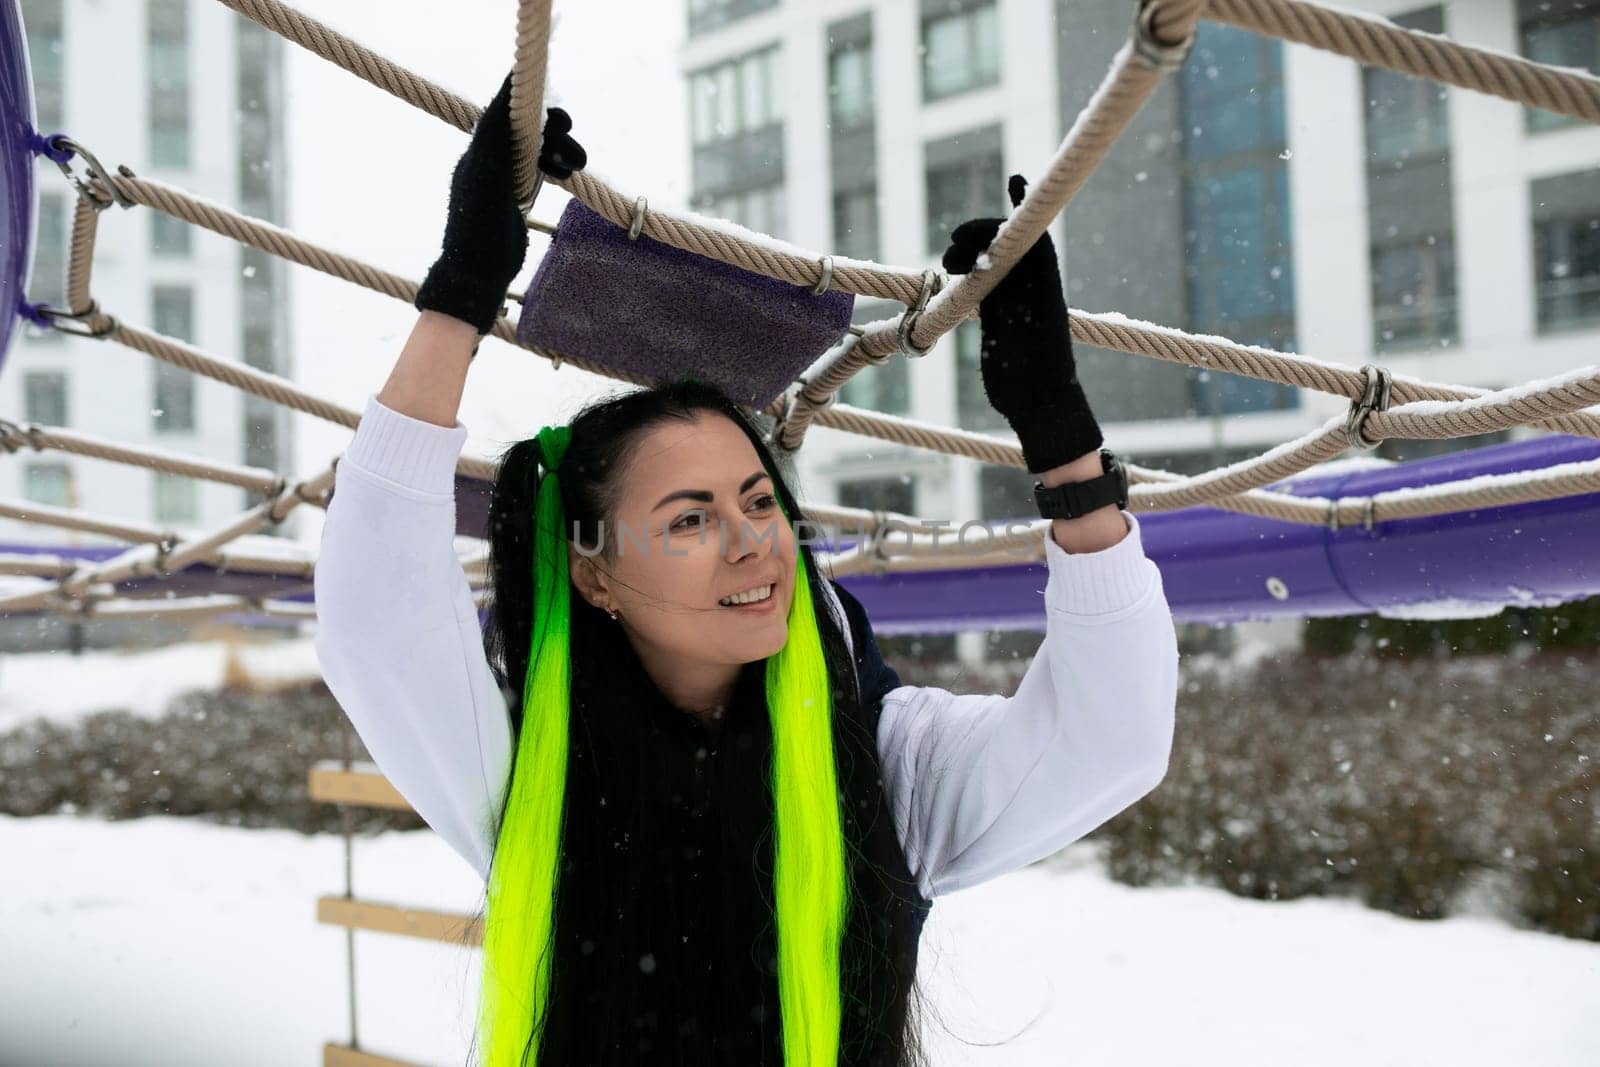 A woman wearing winter clothing is gripping onto a thick rope as she navigates through a snowy landscape. She appears determined and focused on her task.